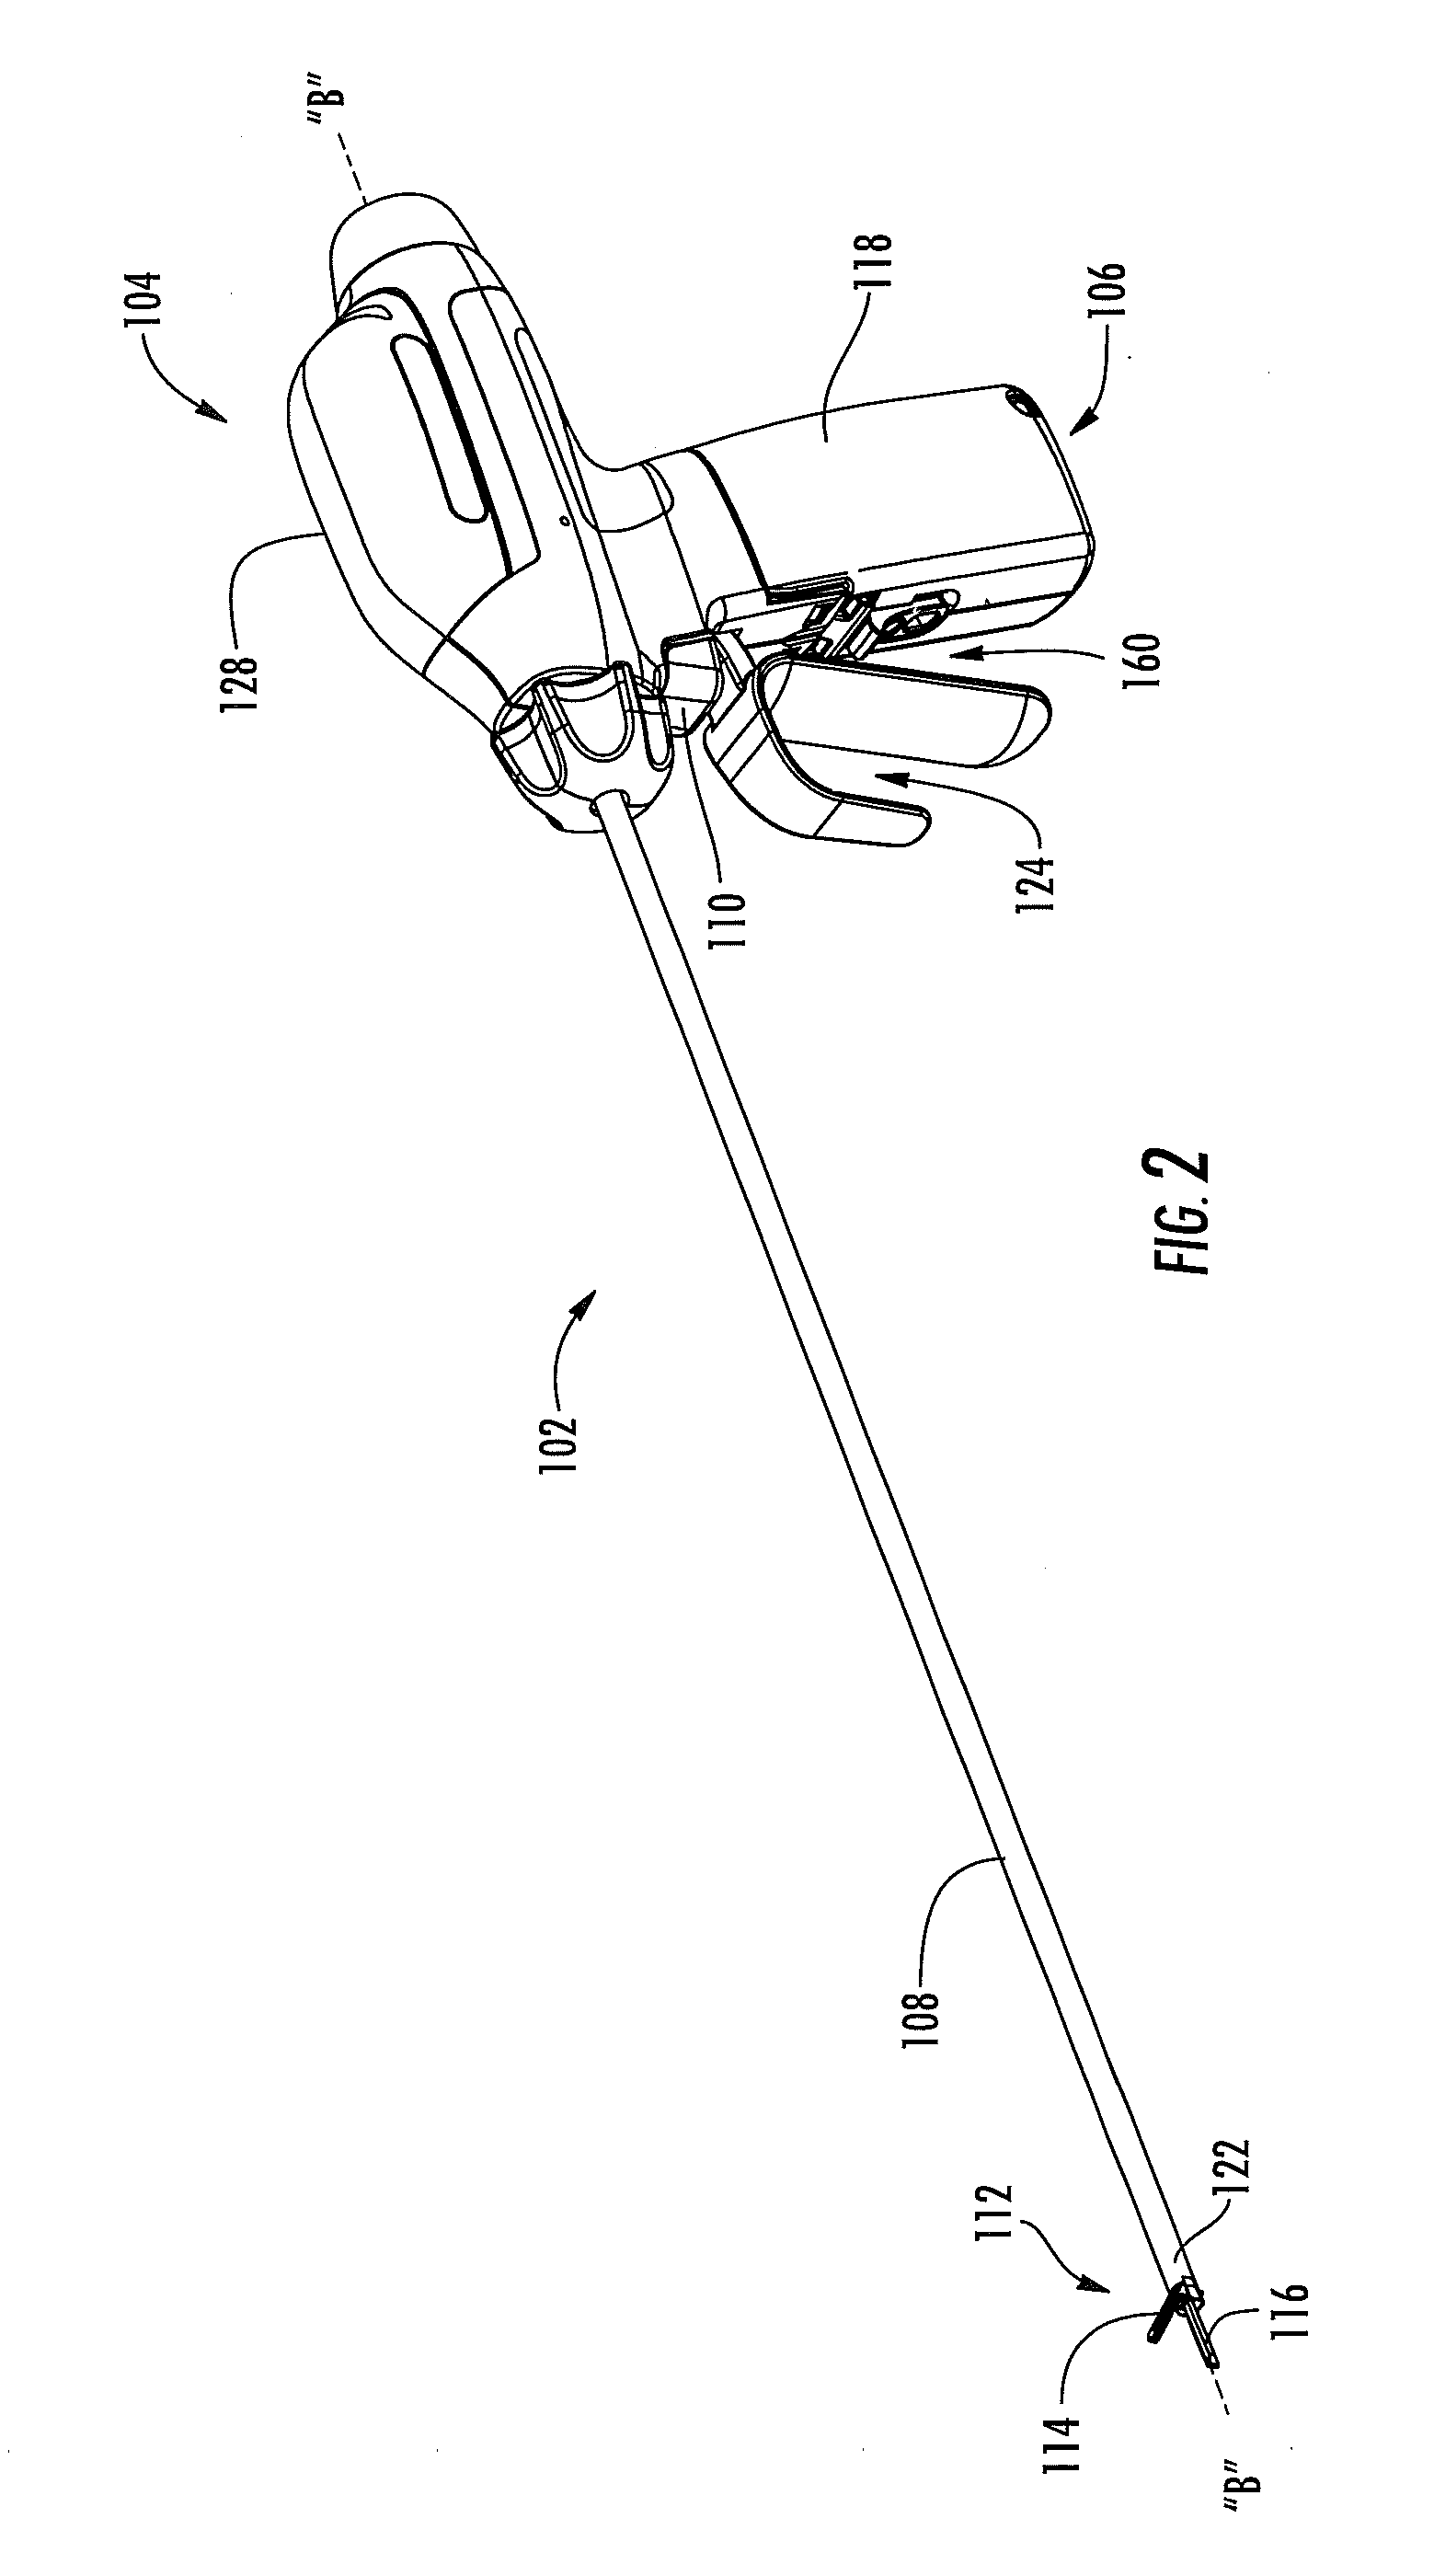 Aseptic bag to encapsulate an energy source of a surgical instrument